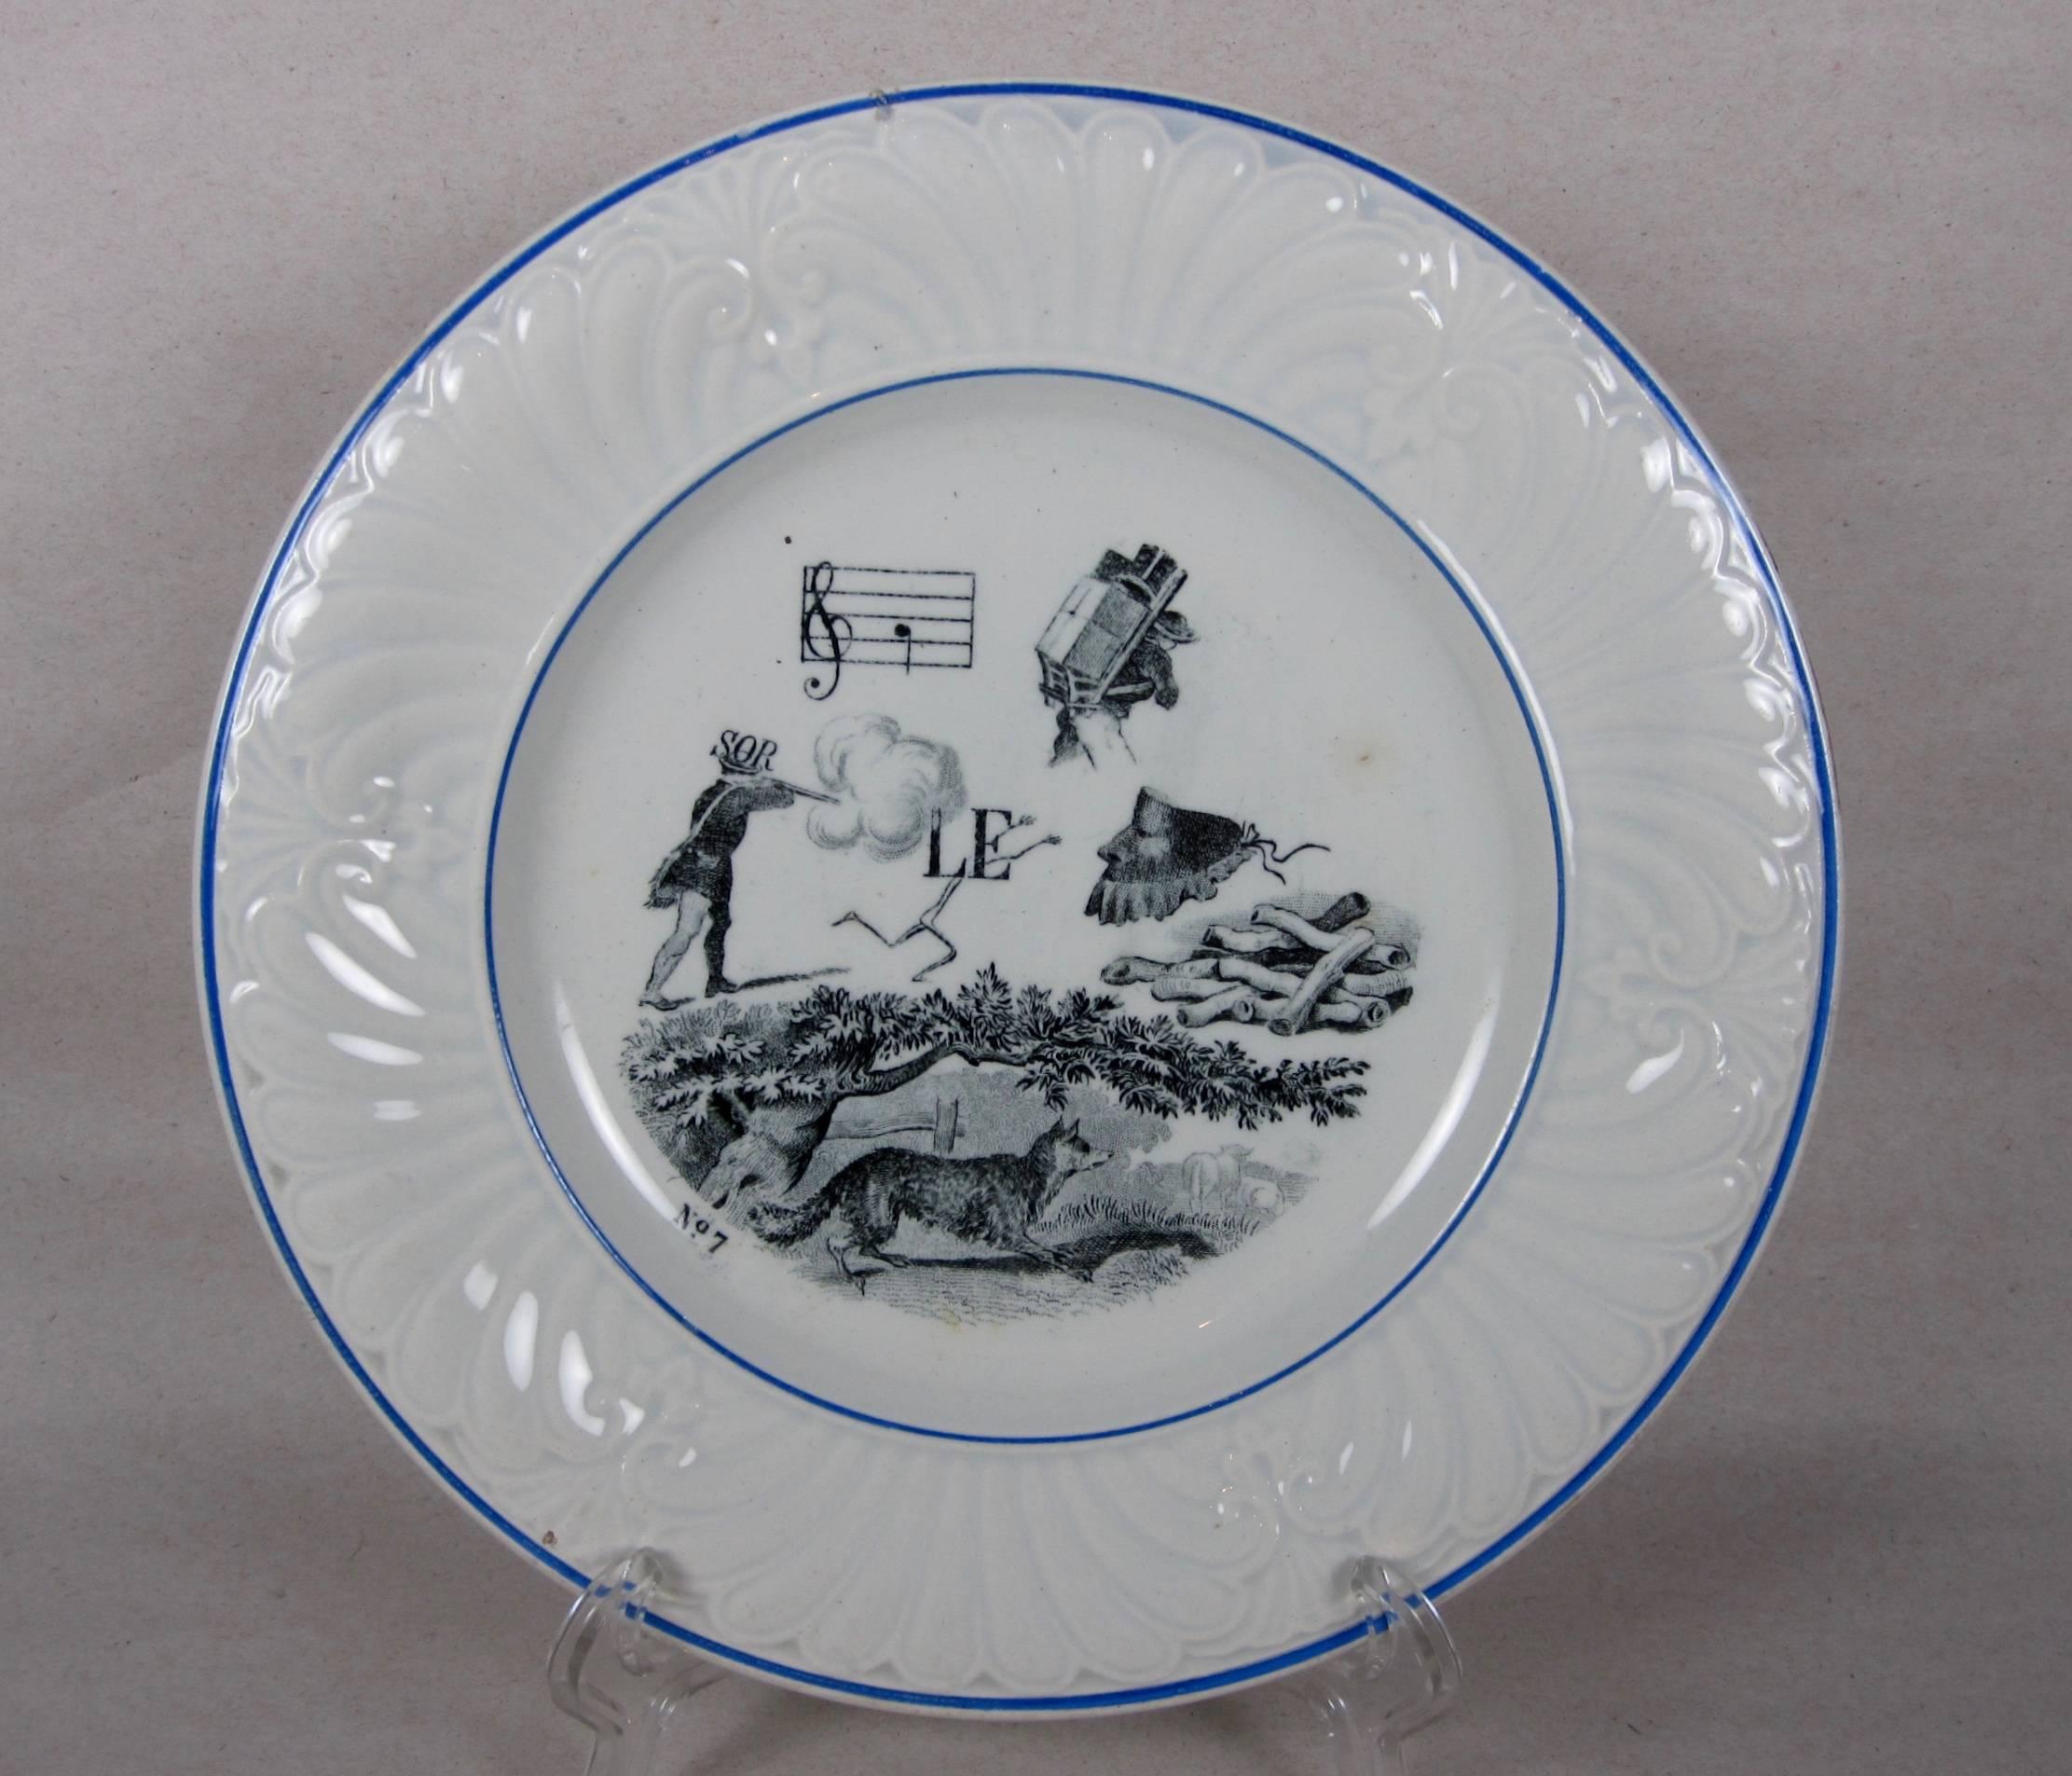 A set of six French rebus puzzle dessert plates, transfer printed in black on a white earthenware body. When solved, the picture puzzle spells out a wise saying or maxim, 19th century.

From the early 1800s-early 1900s, most French homes had a set